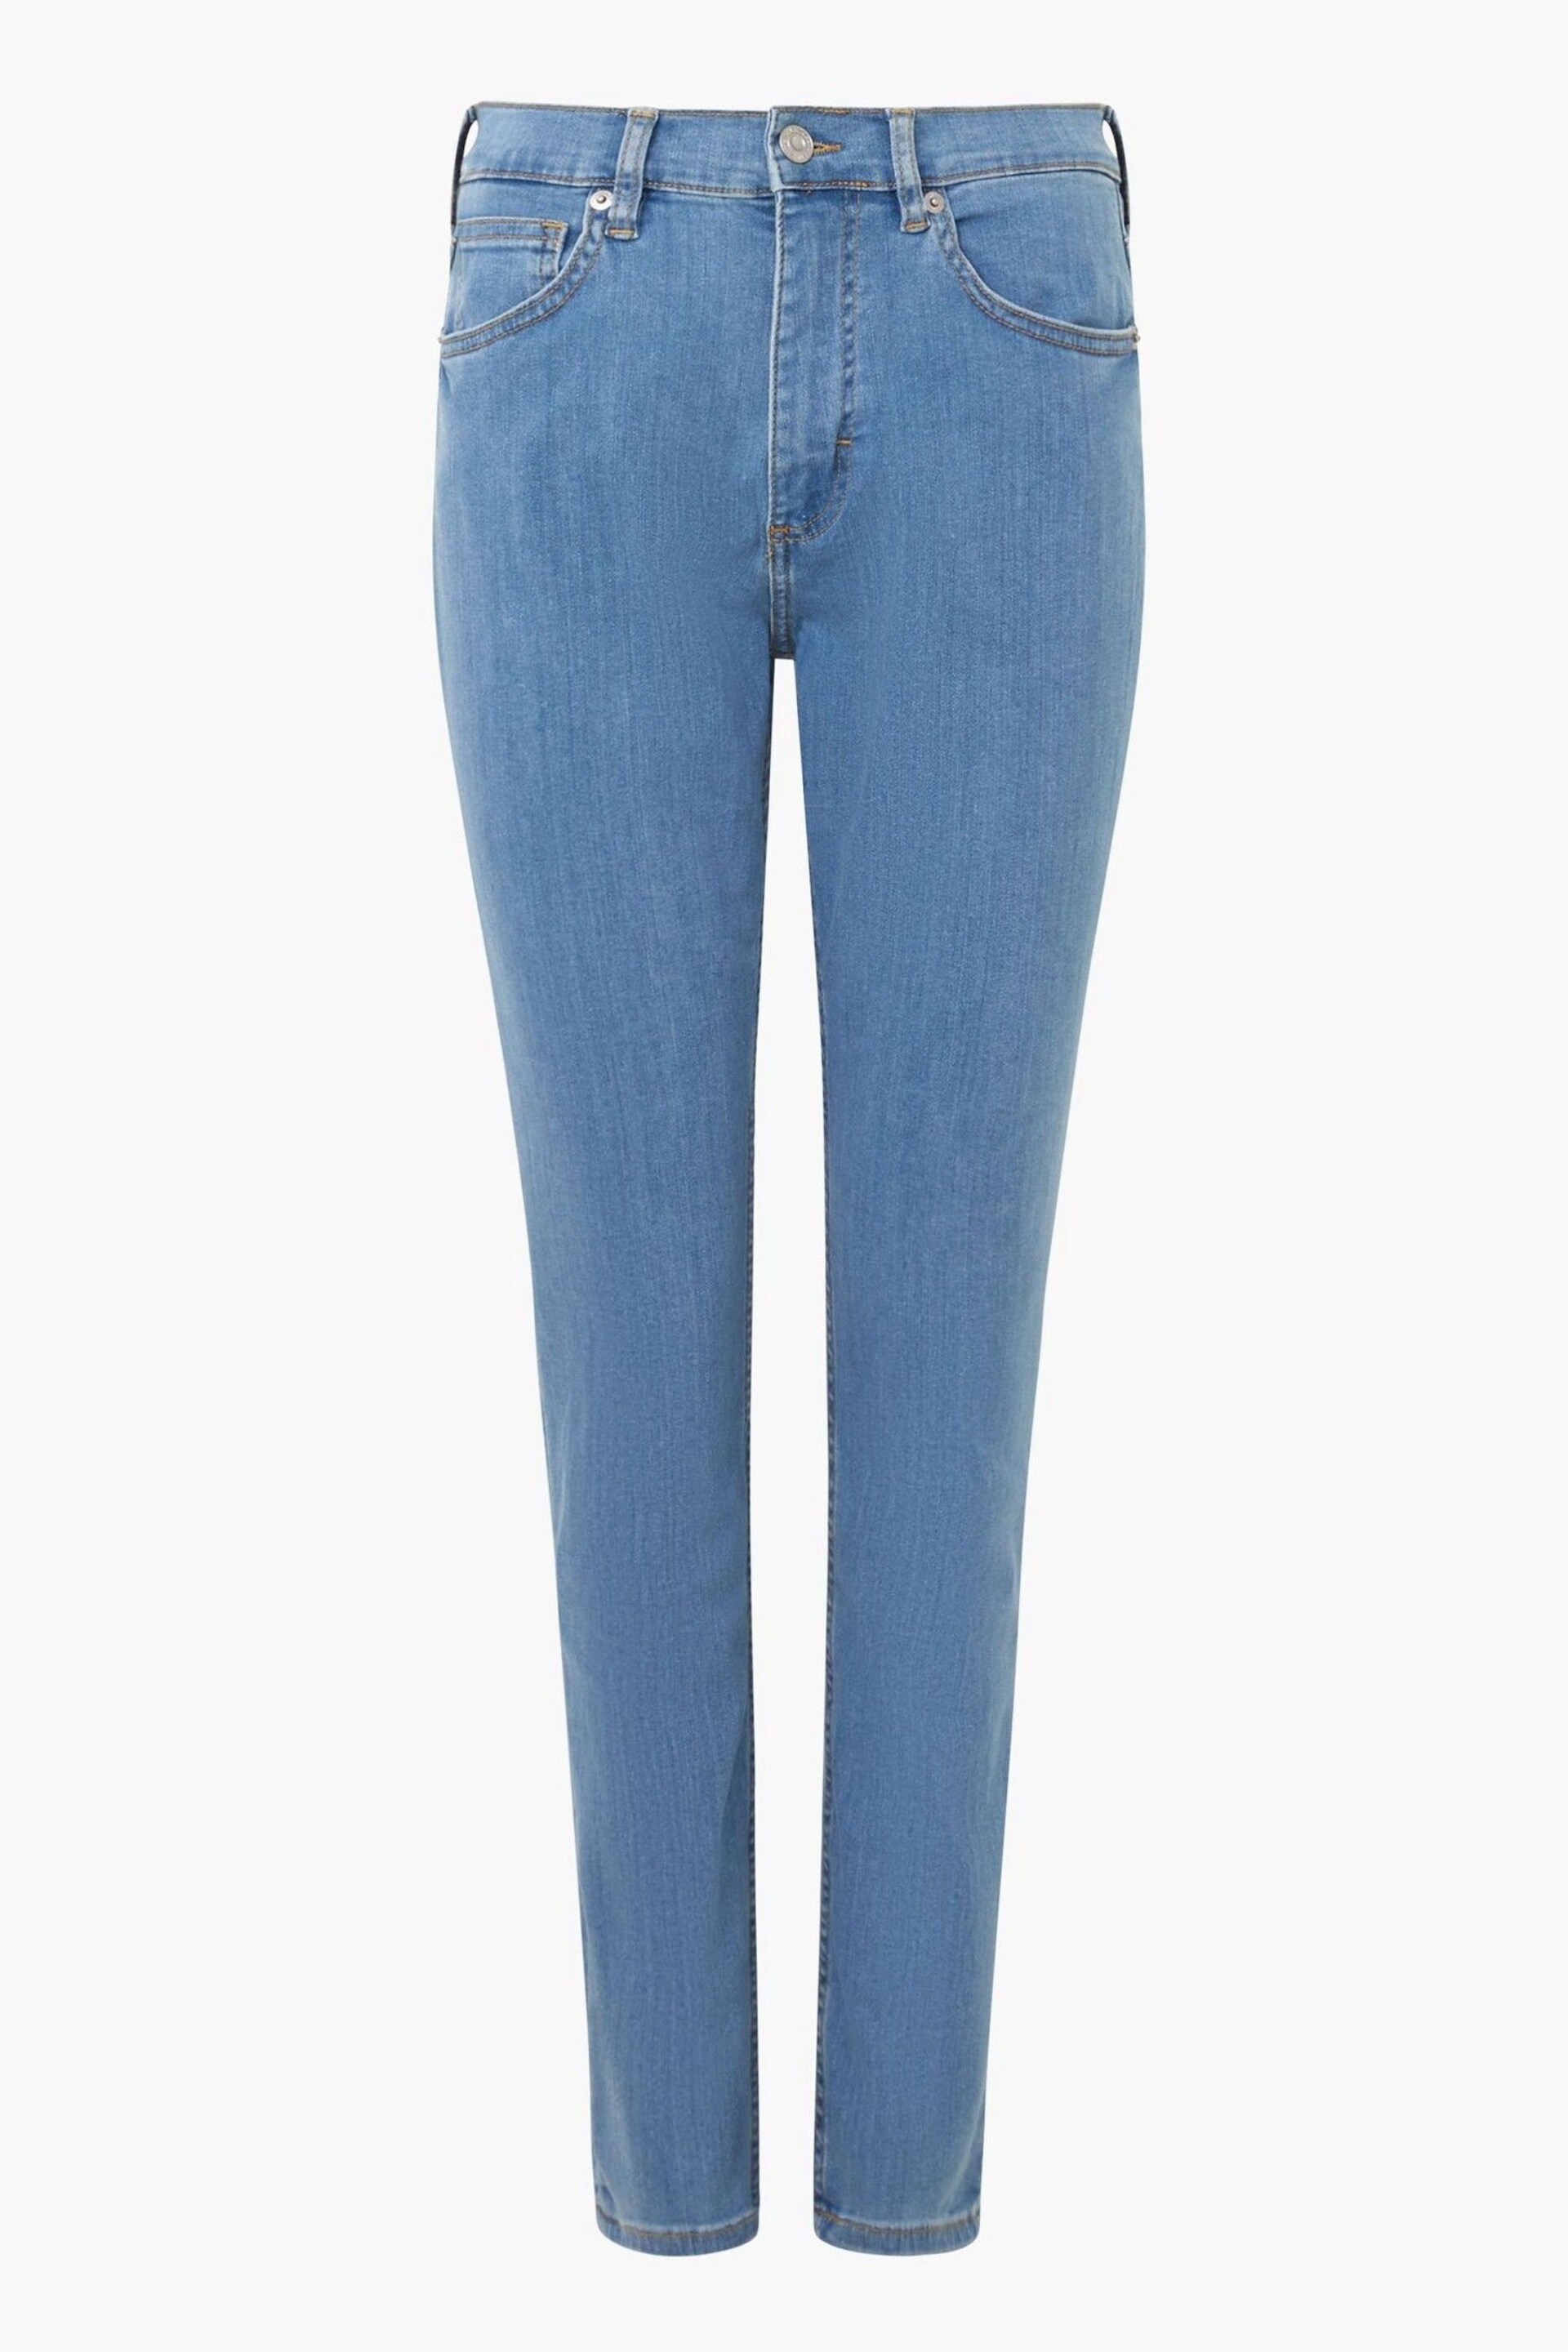 French Connection Soft Stretch Skinny High Rise Jeans - Image 4 of 4